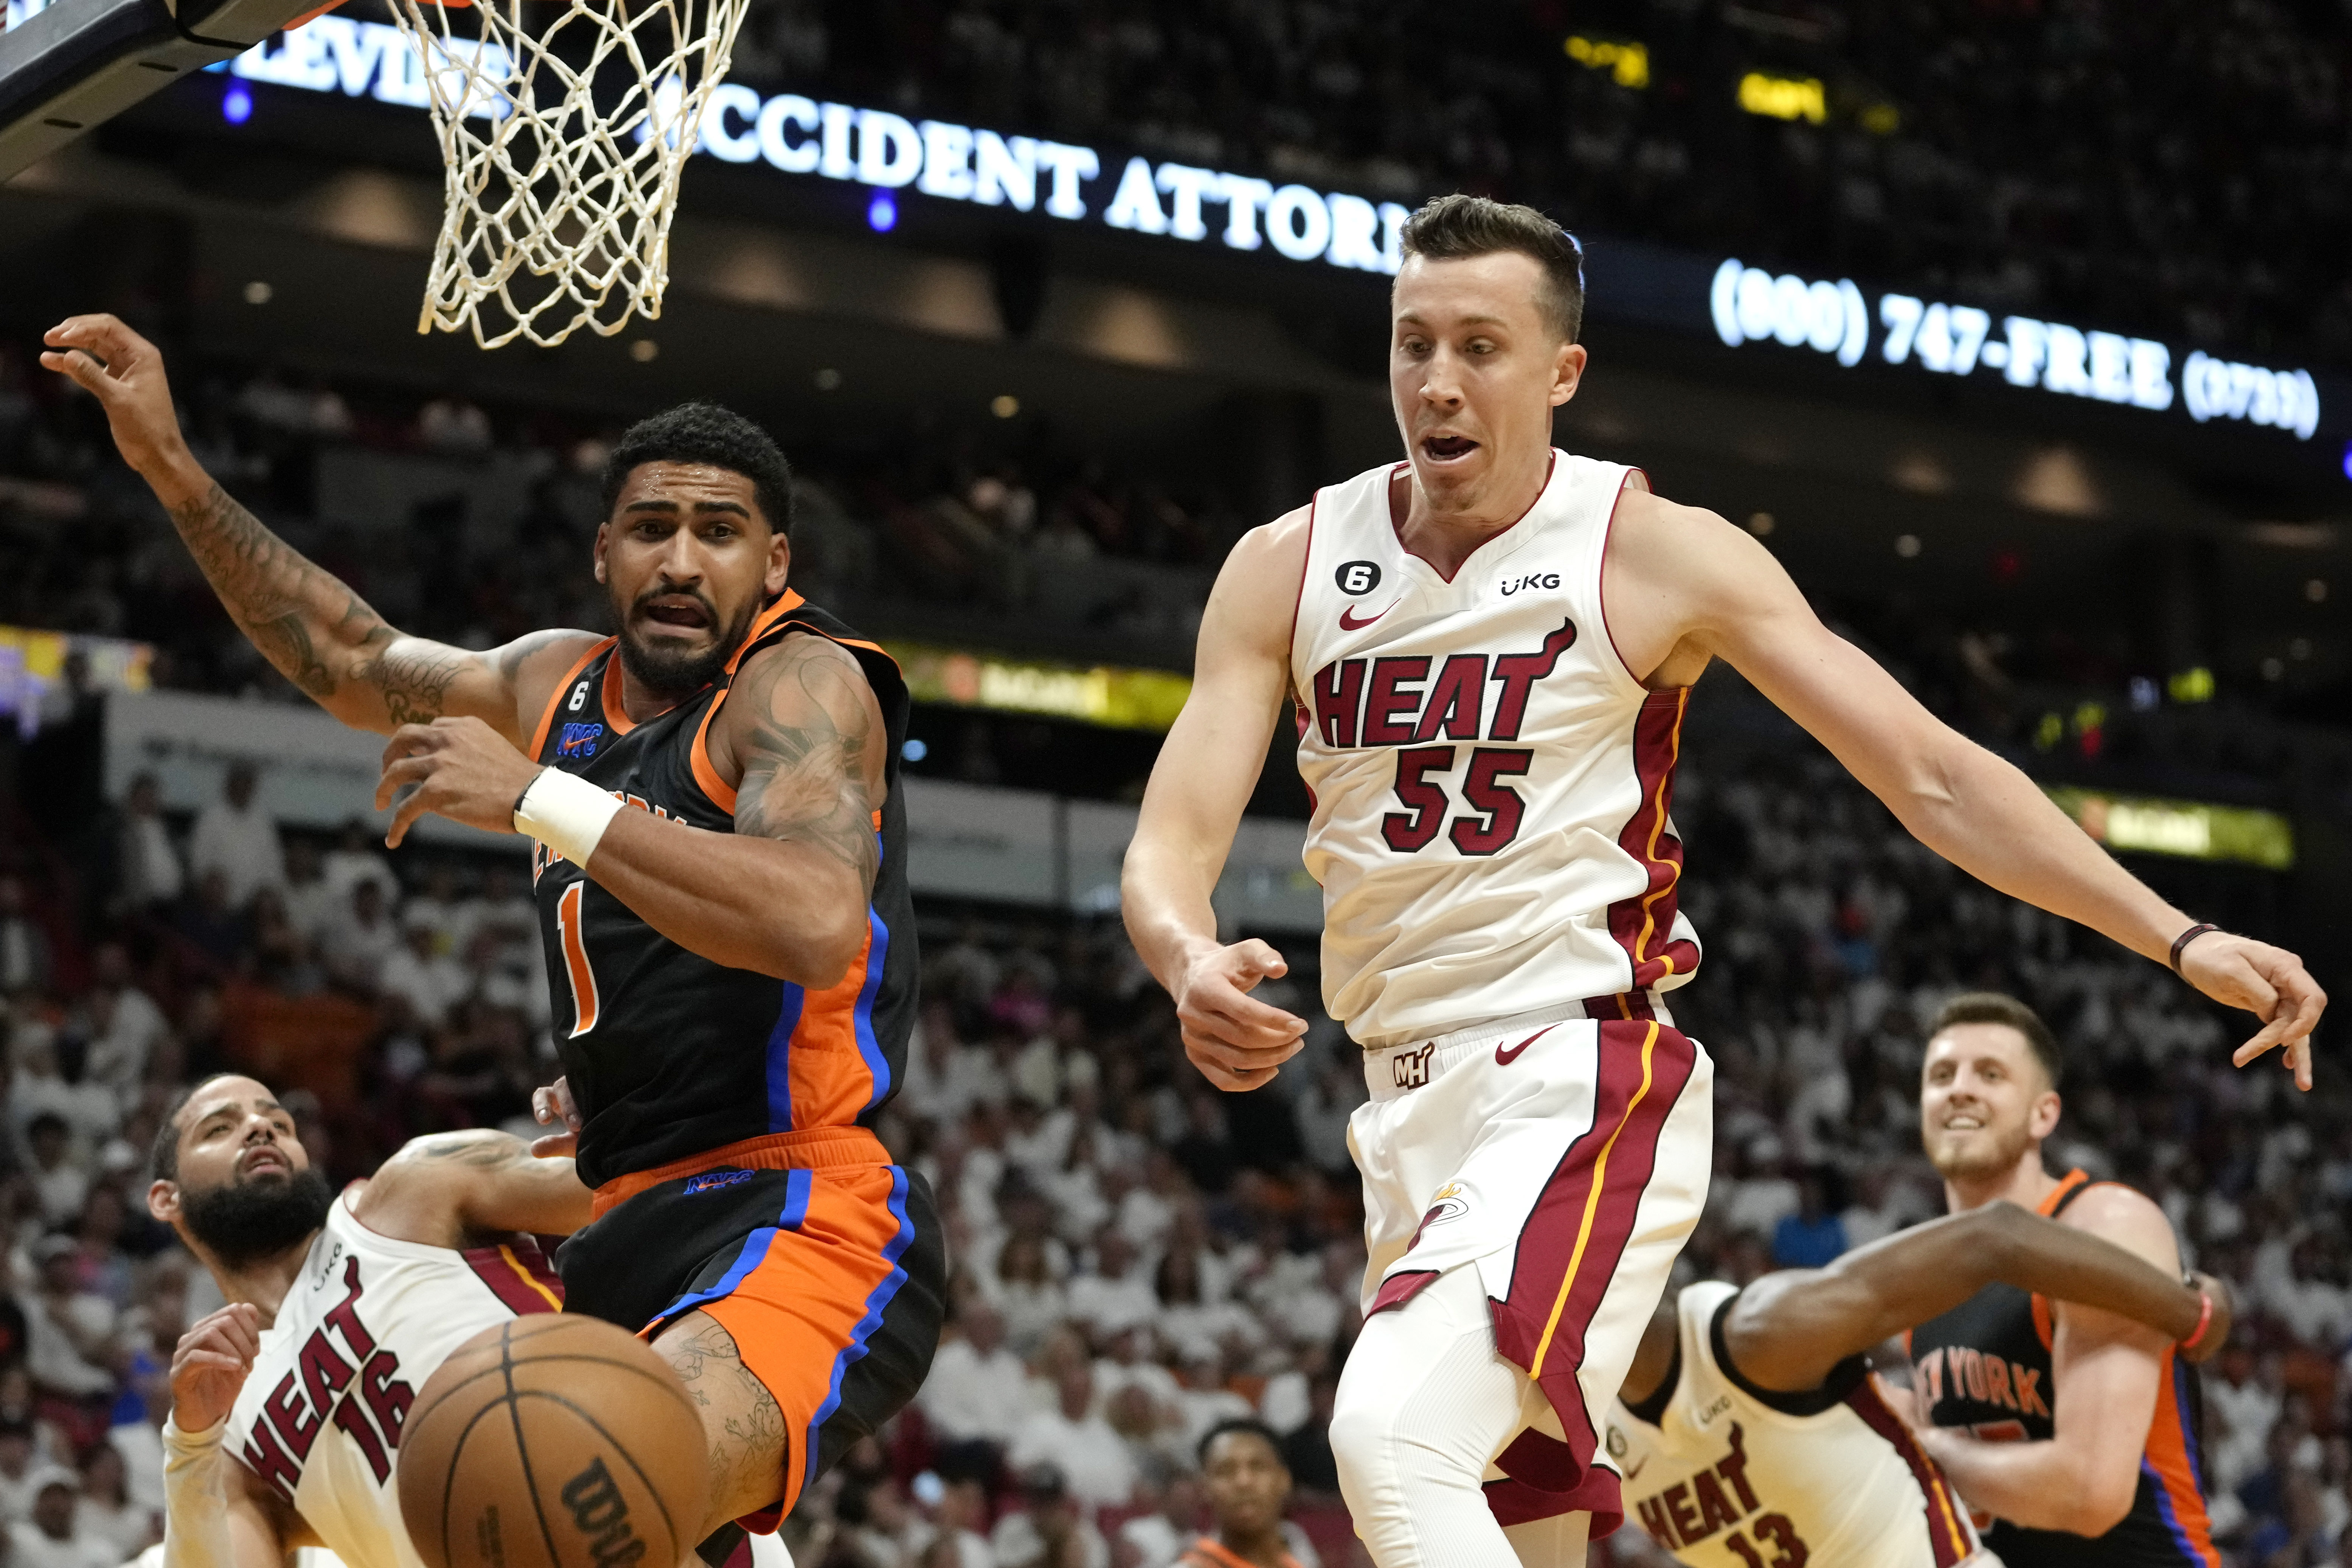 Lakers, Heat Surging in Series Through Defensive Superiority